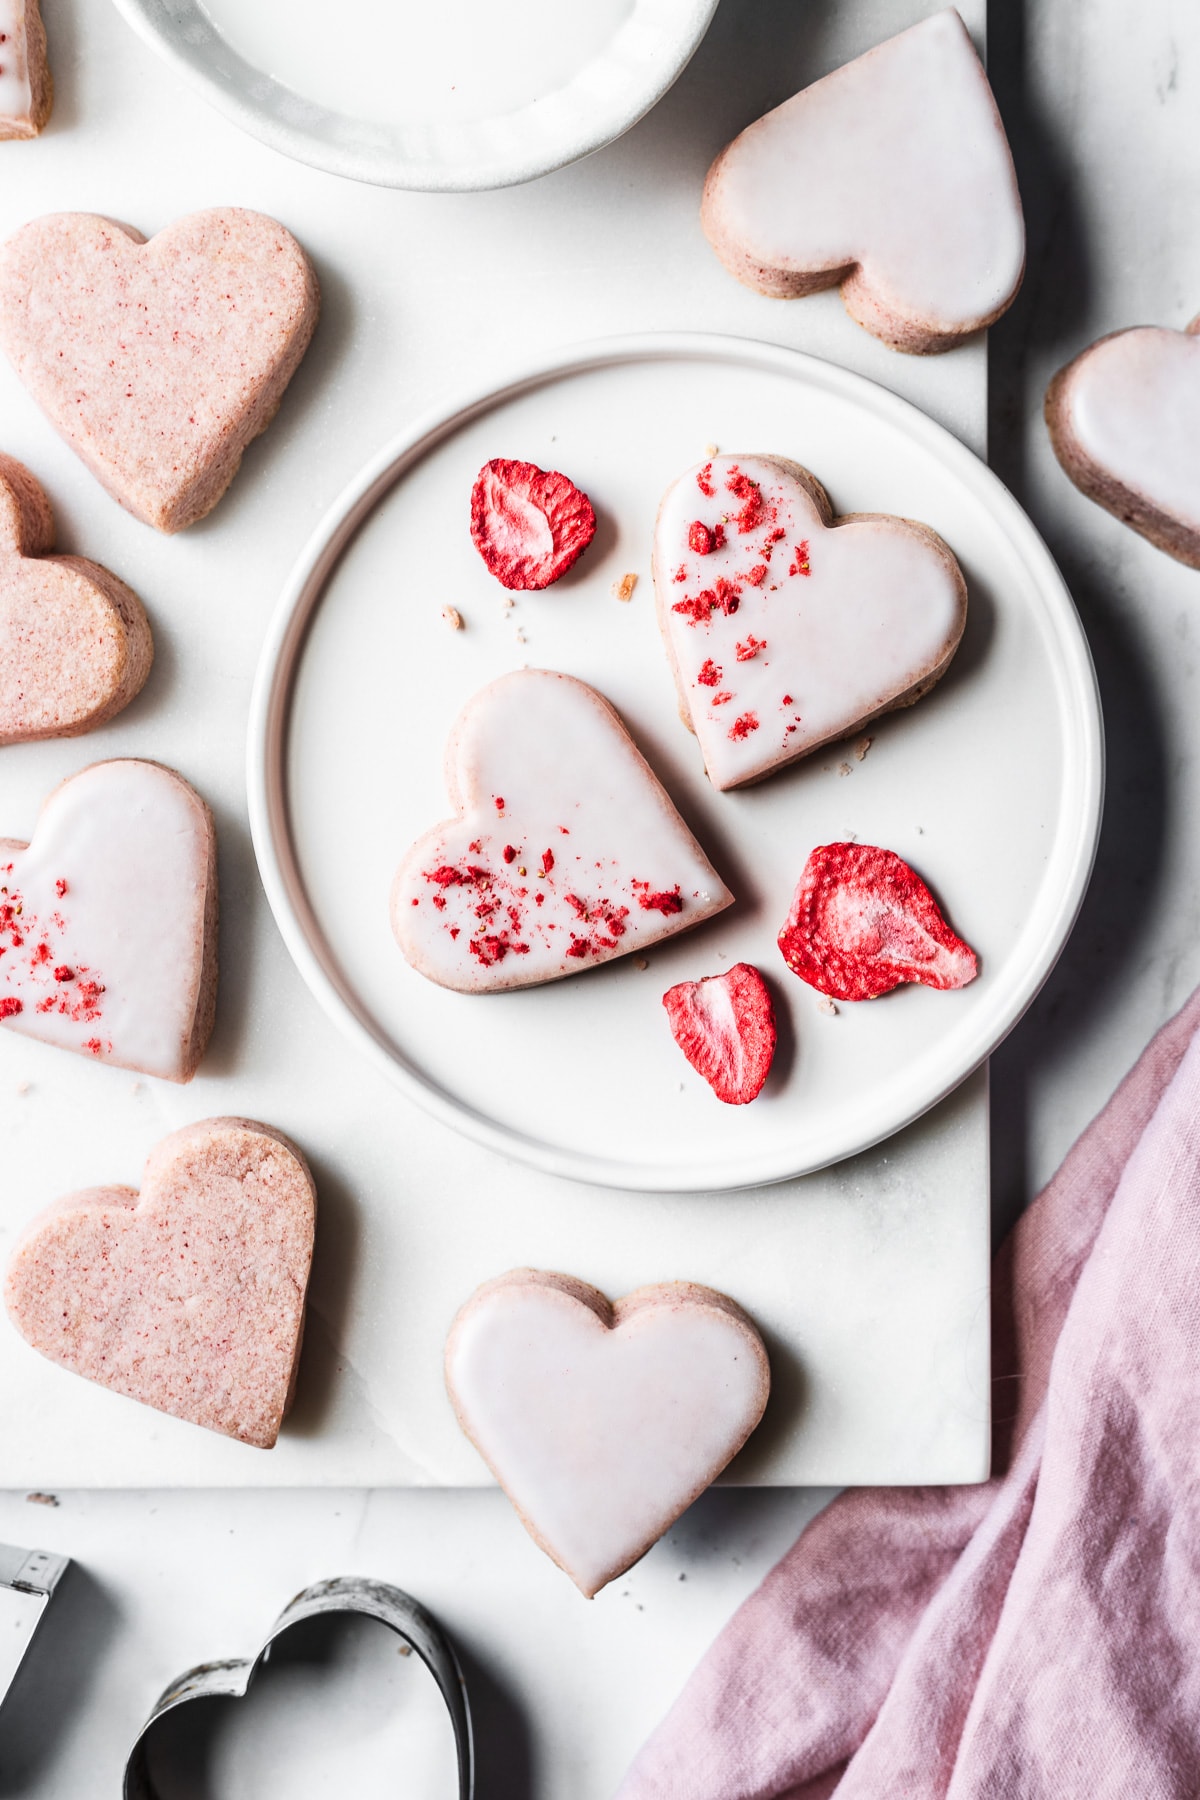 Glazed heart shaped cookies on a white plate and a white marble tray on a light grey marble surface. Some of the cookies have been dipped in white glaze. Heart shaped cookie cutters, a white ceramic bowl of glaze, and a pink napkin rest nearby.